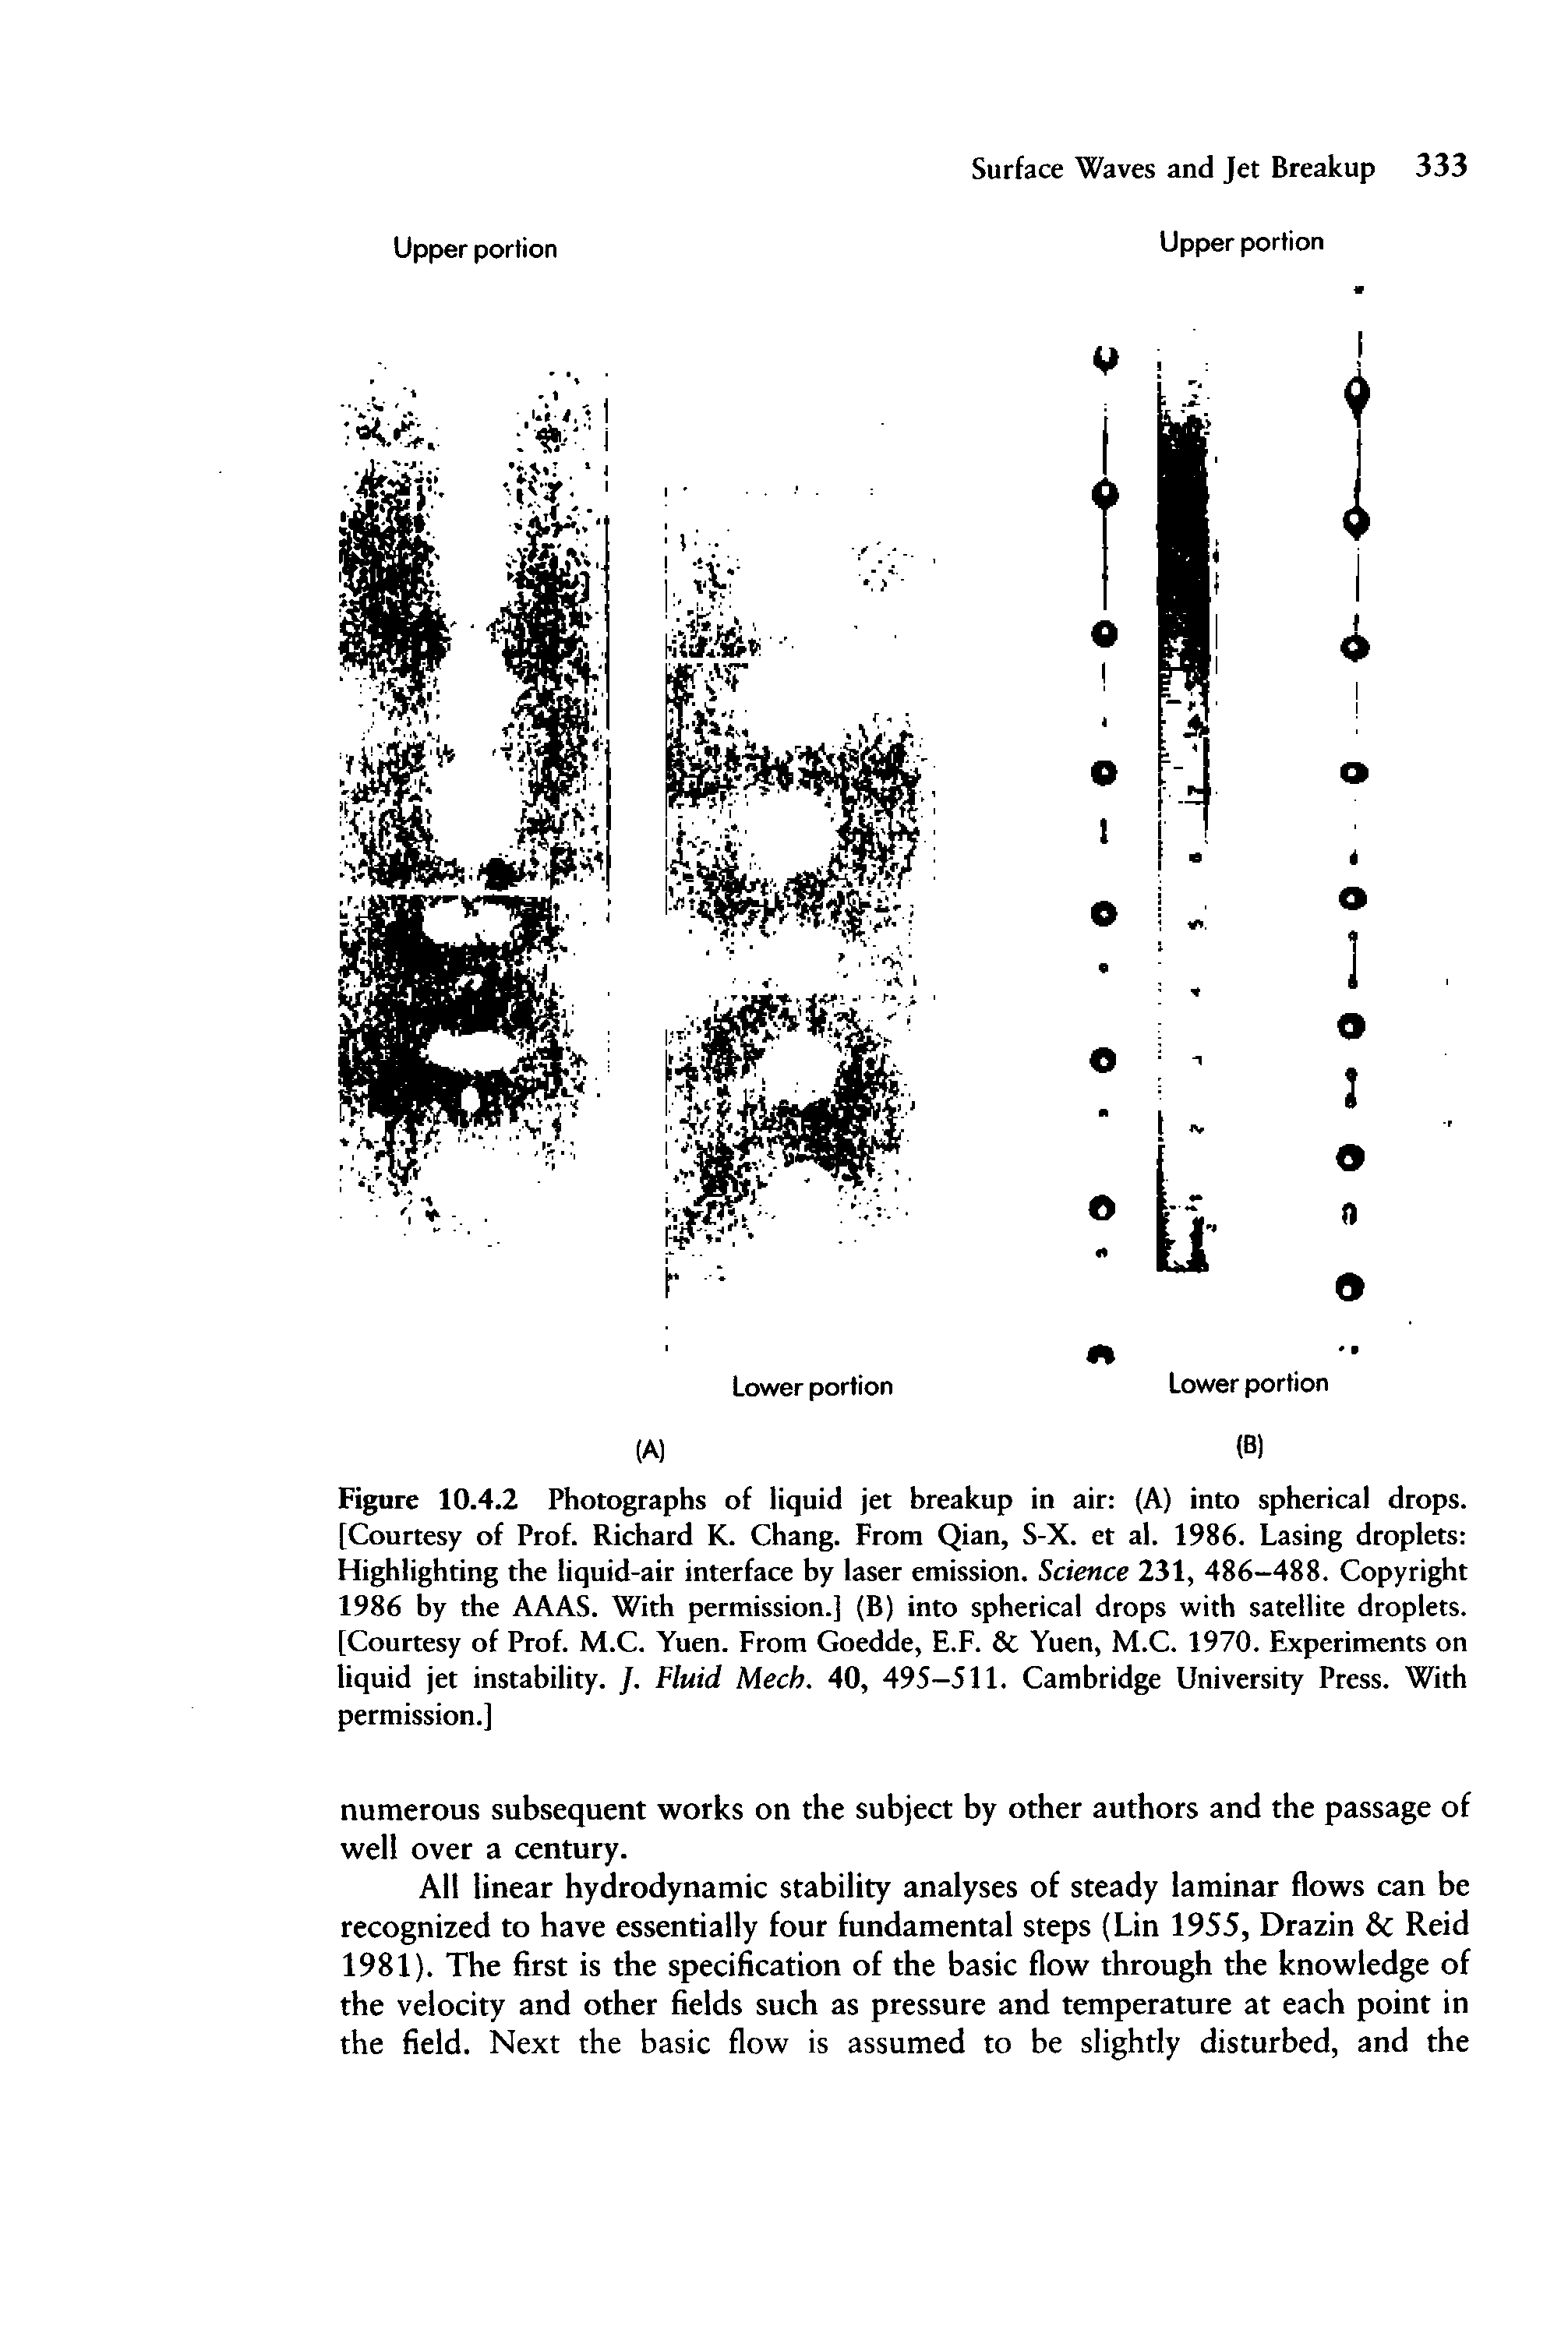 Figure 10.4.2 Photographs of liquid jet breakup in air (A) into spherical drops. [Courtesy of Prof. Richard K. Chang. From Qian, S-X. et al. 1986. Lasing droplets Highlighting the liquid-air interface by laser emission. Science 231, 486-488. Copyright 1986 by the AAAS. With permission.] (B) into spherical drops with satellite droplets. [Courtesy of Prof. M.C. Yuen. From Goedde, E.F. Yuen, M.C. 1970. Experiments on liquid jet instability. /. Fluid Mech. 40, 495-511. Cambridge University Press. With permission.]...